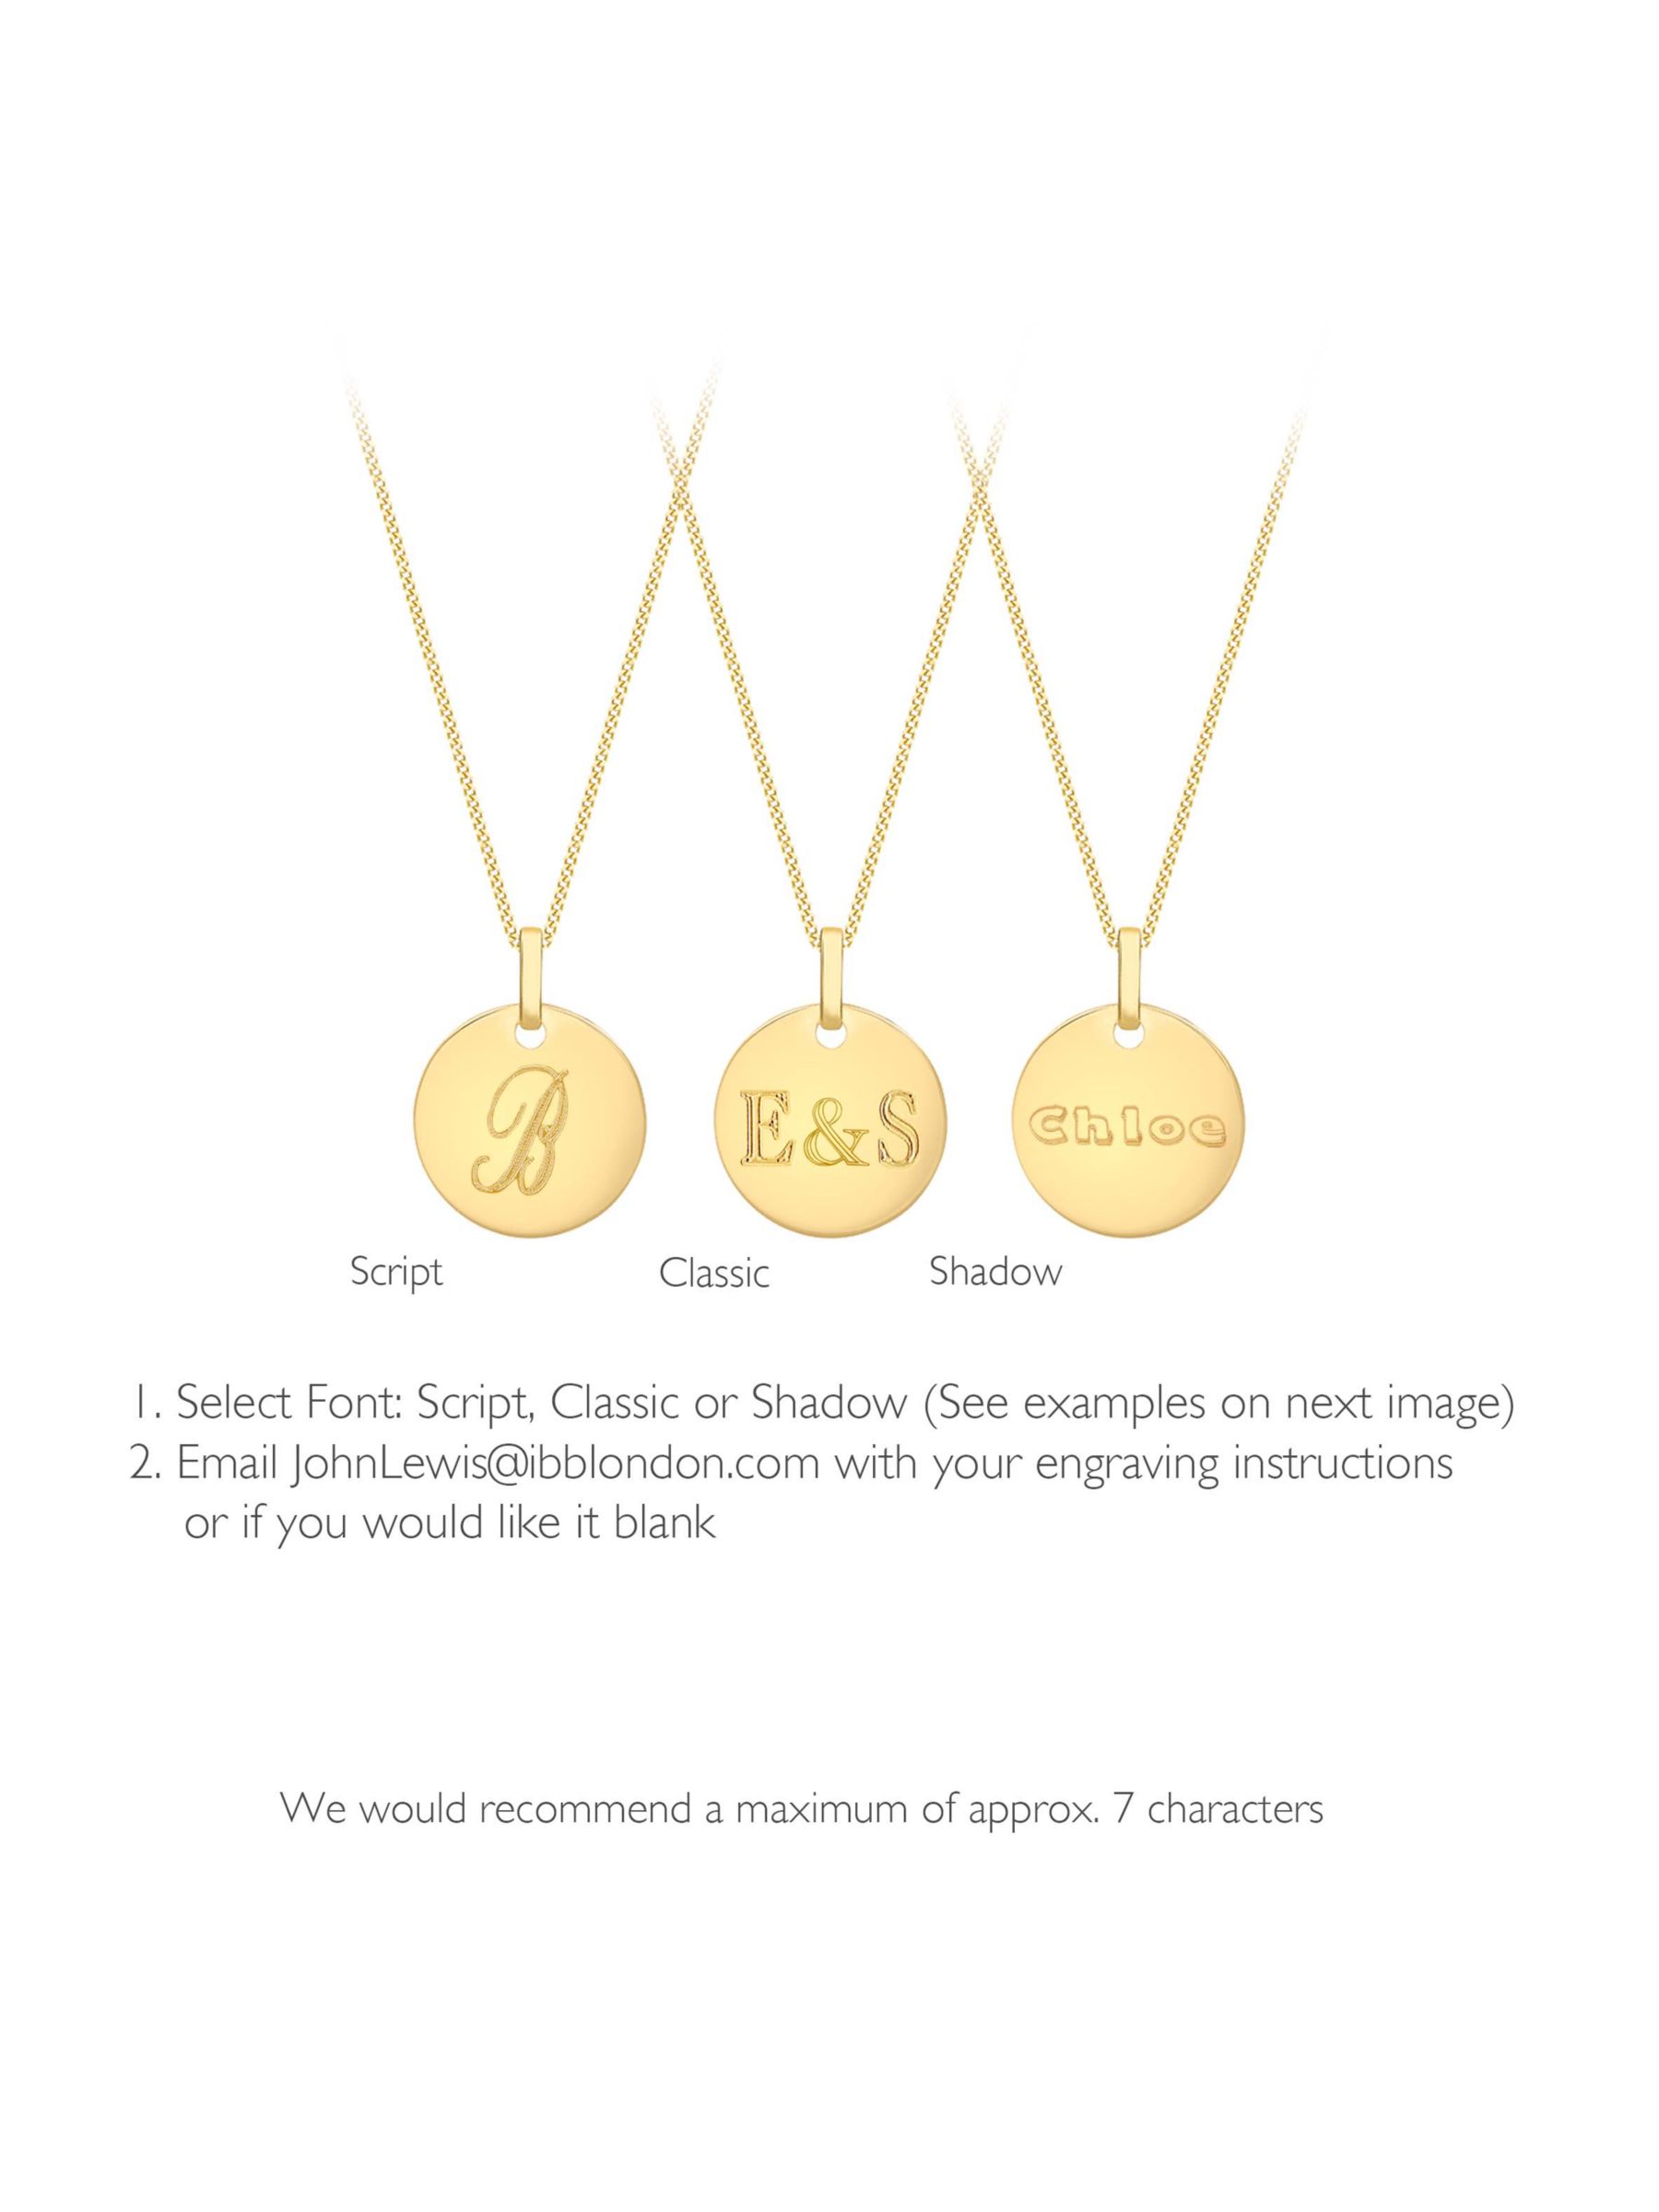 IBB Personalised 9ct Gold Disc Initial Pendant Necklace, Yellow Gold